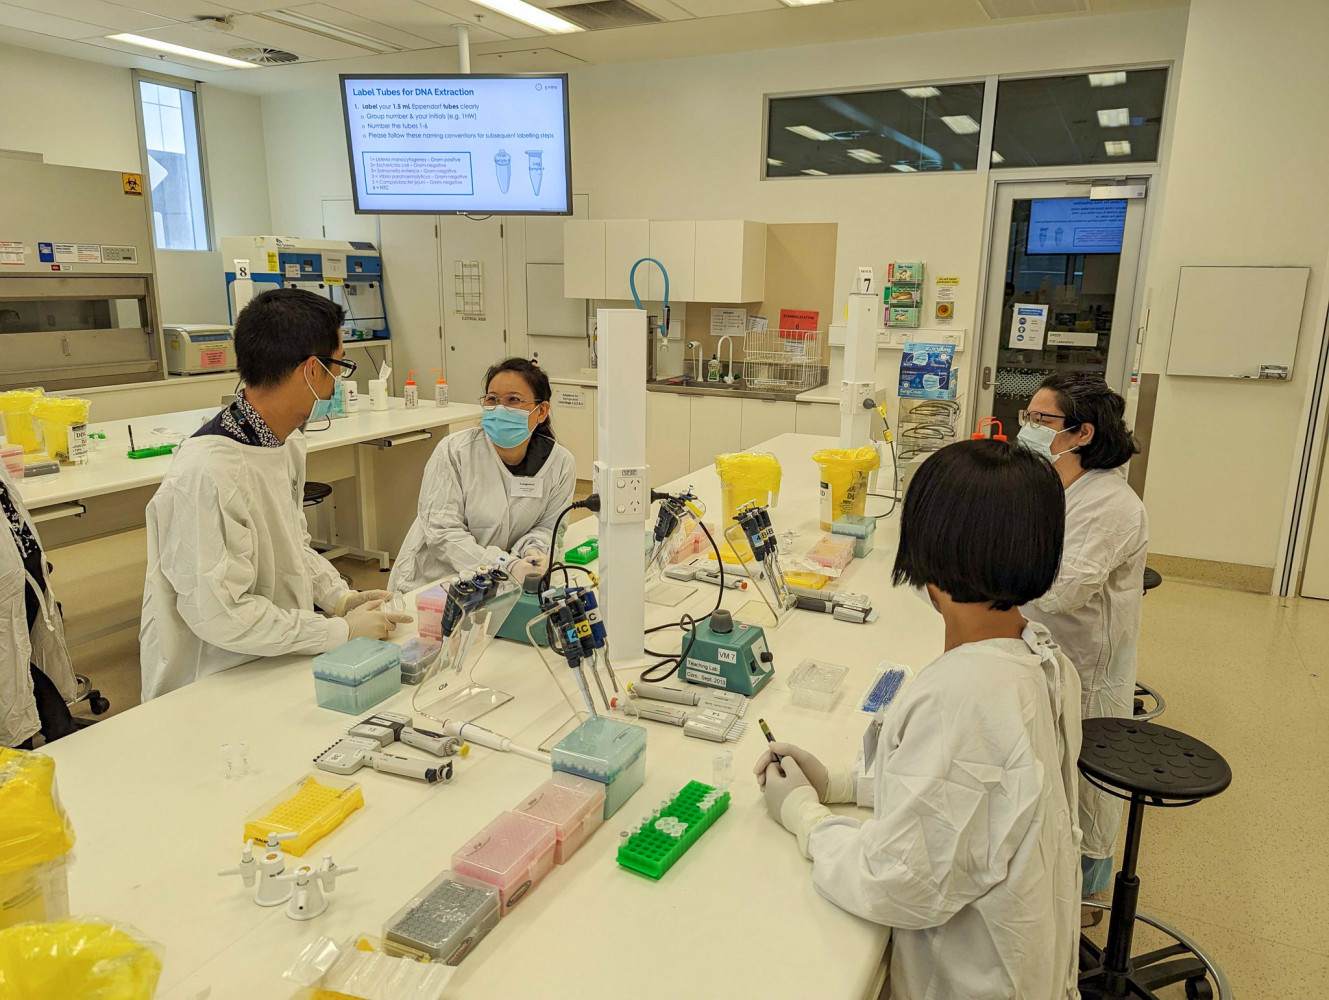 Attendees undertaking wet lab training in the laboratory